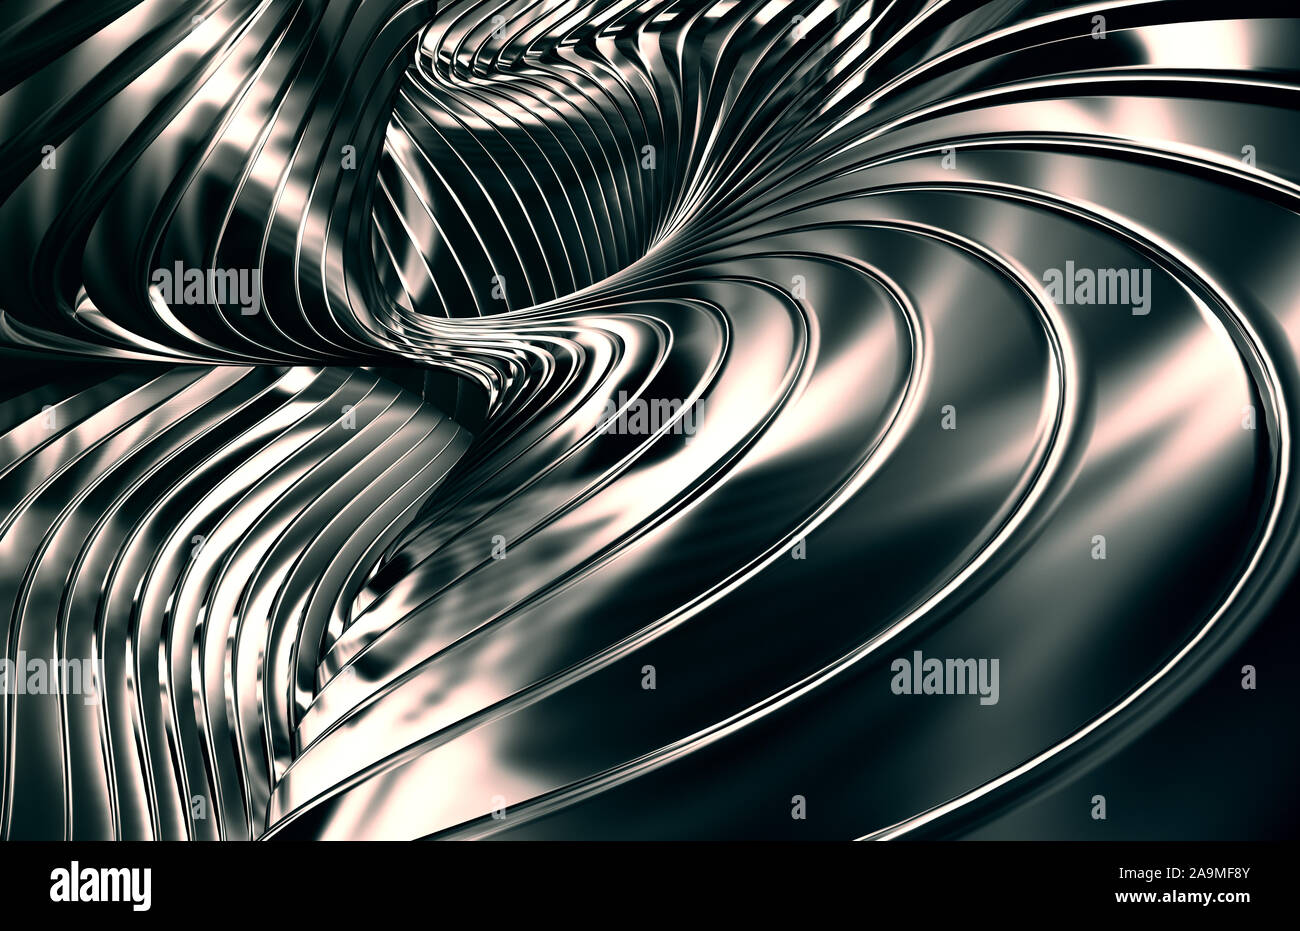 Abstract Futuristic Metal Background. Unreal Shapes From Black Stripes. 3D Illustration. Stock Photo